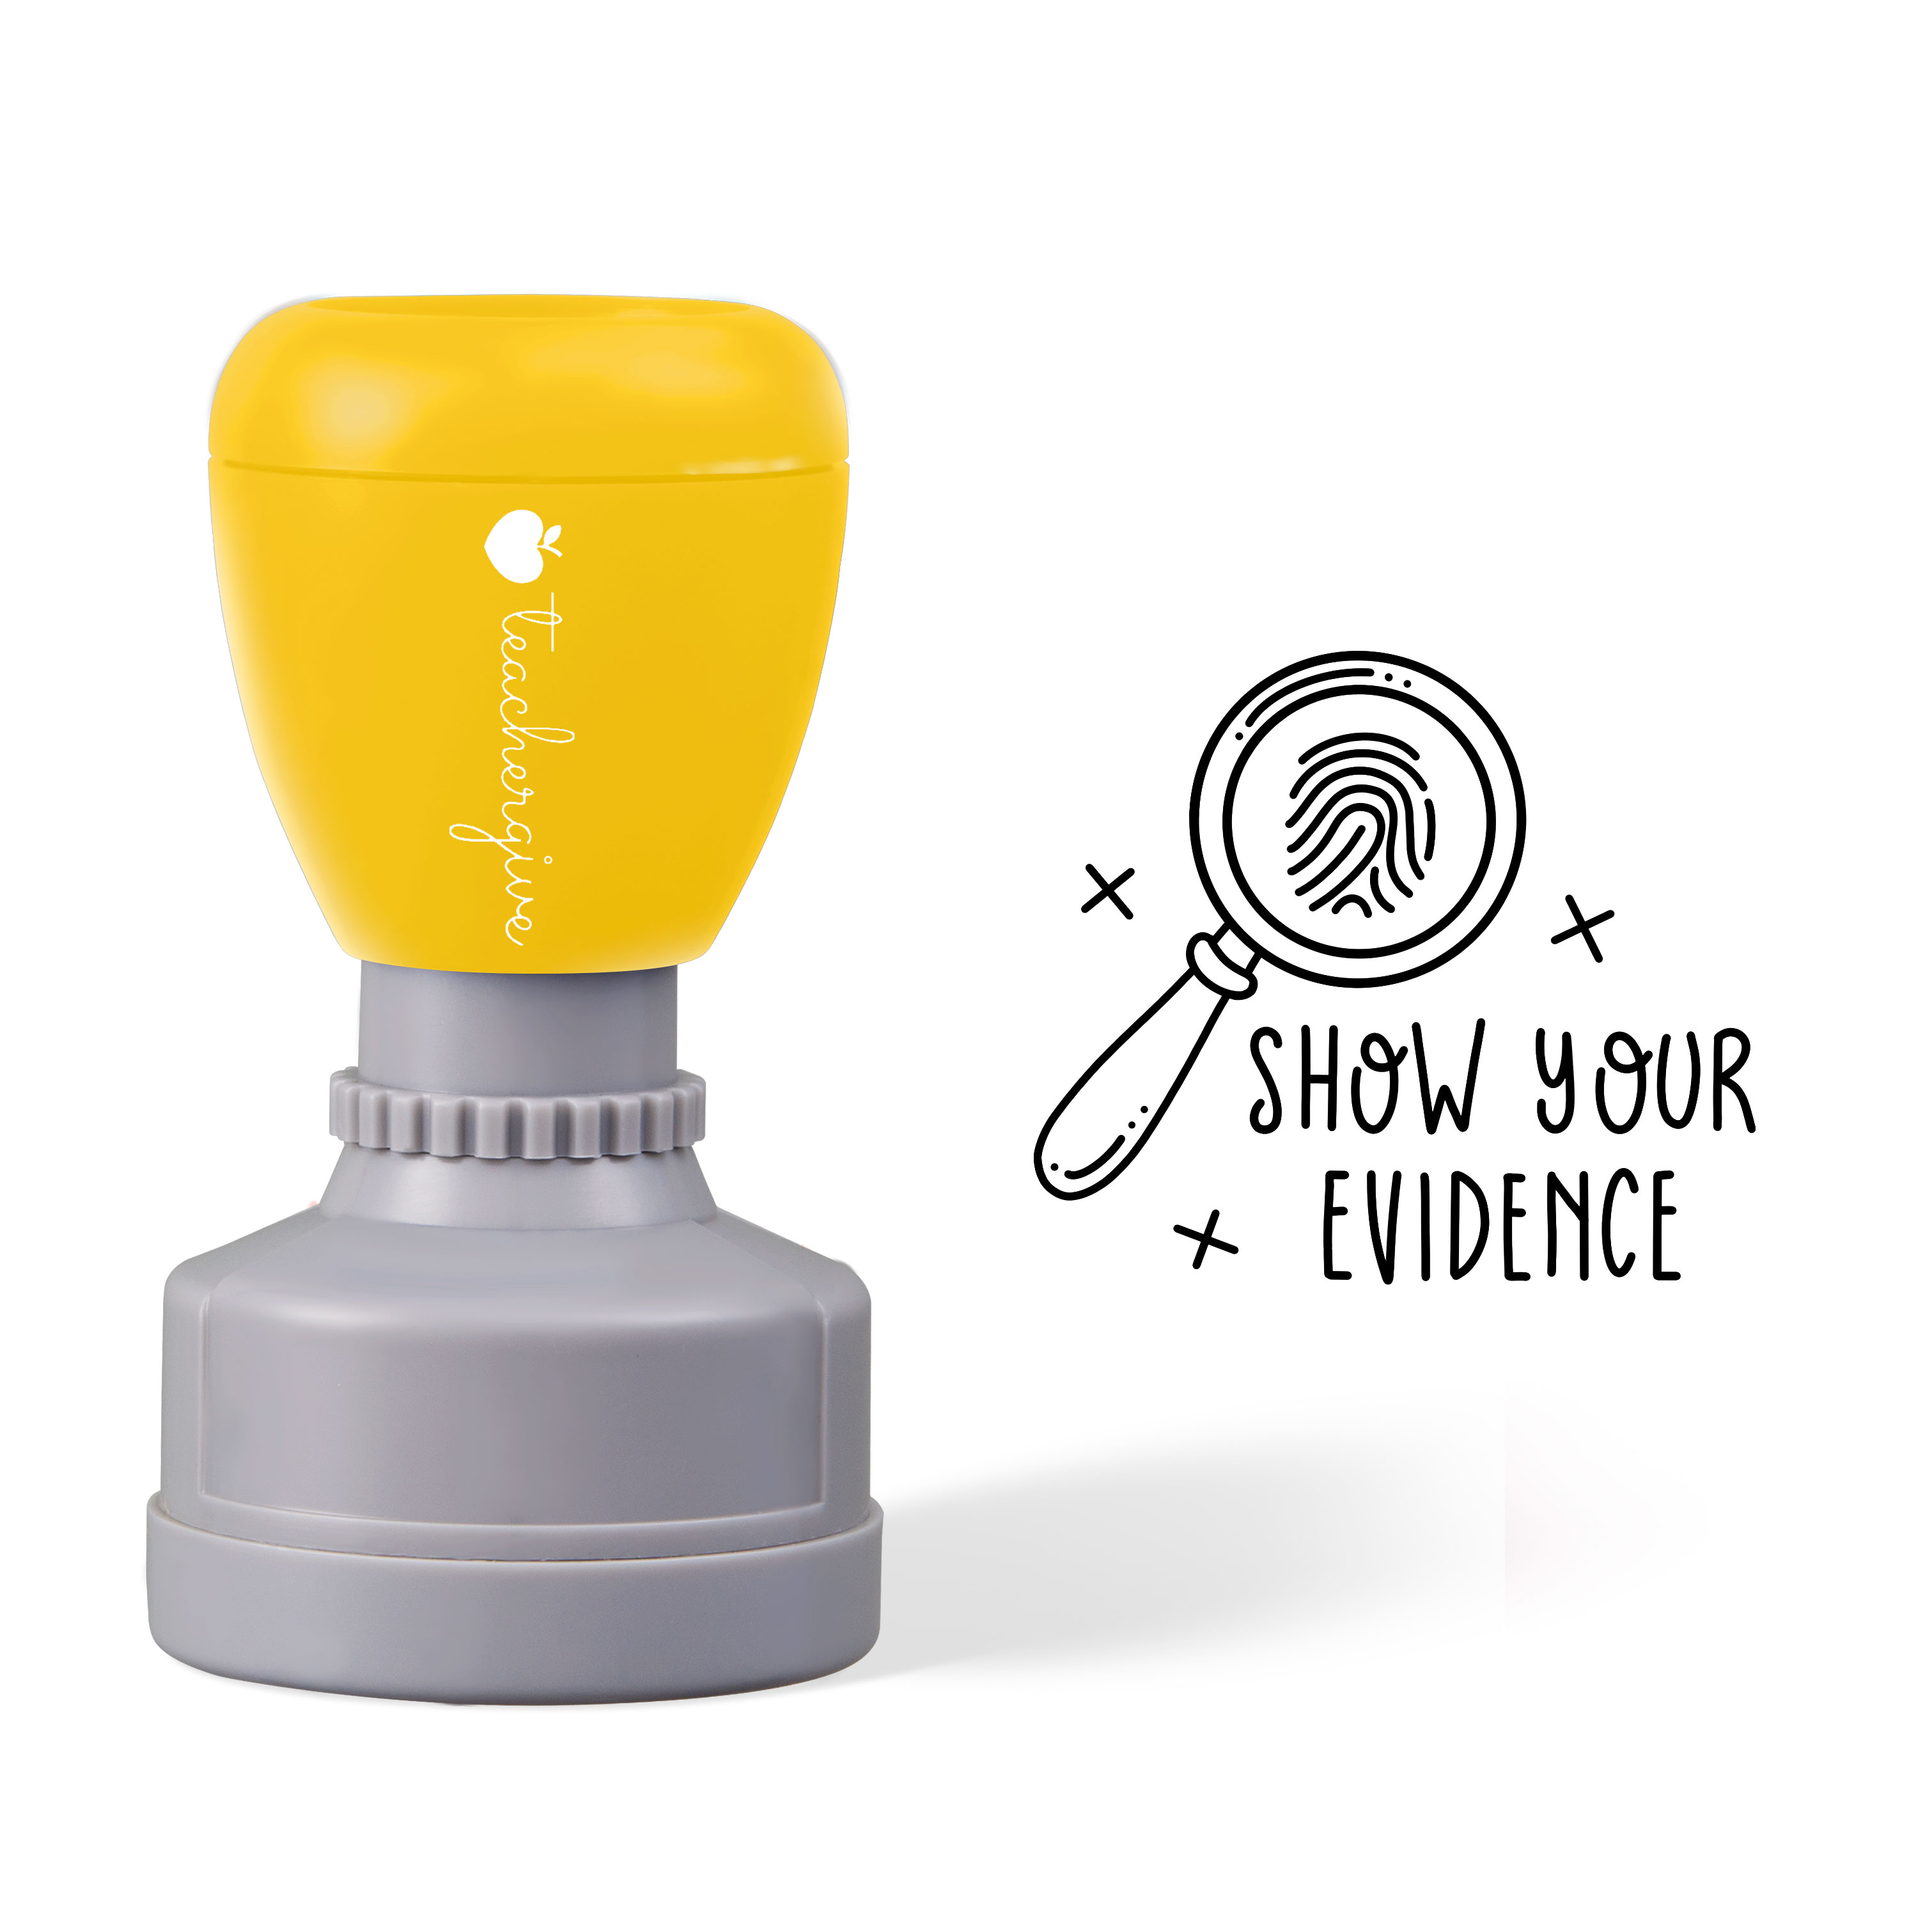 Show Your Evidence Stamp